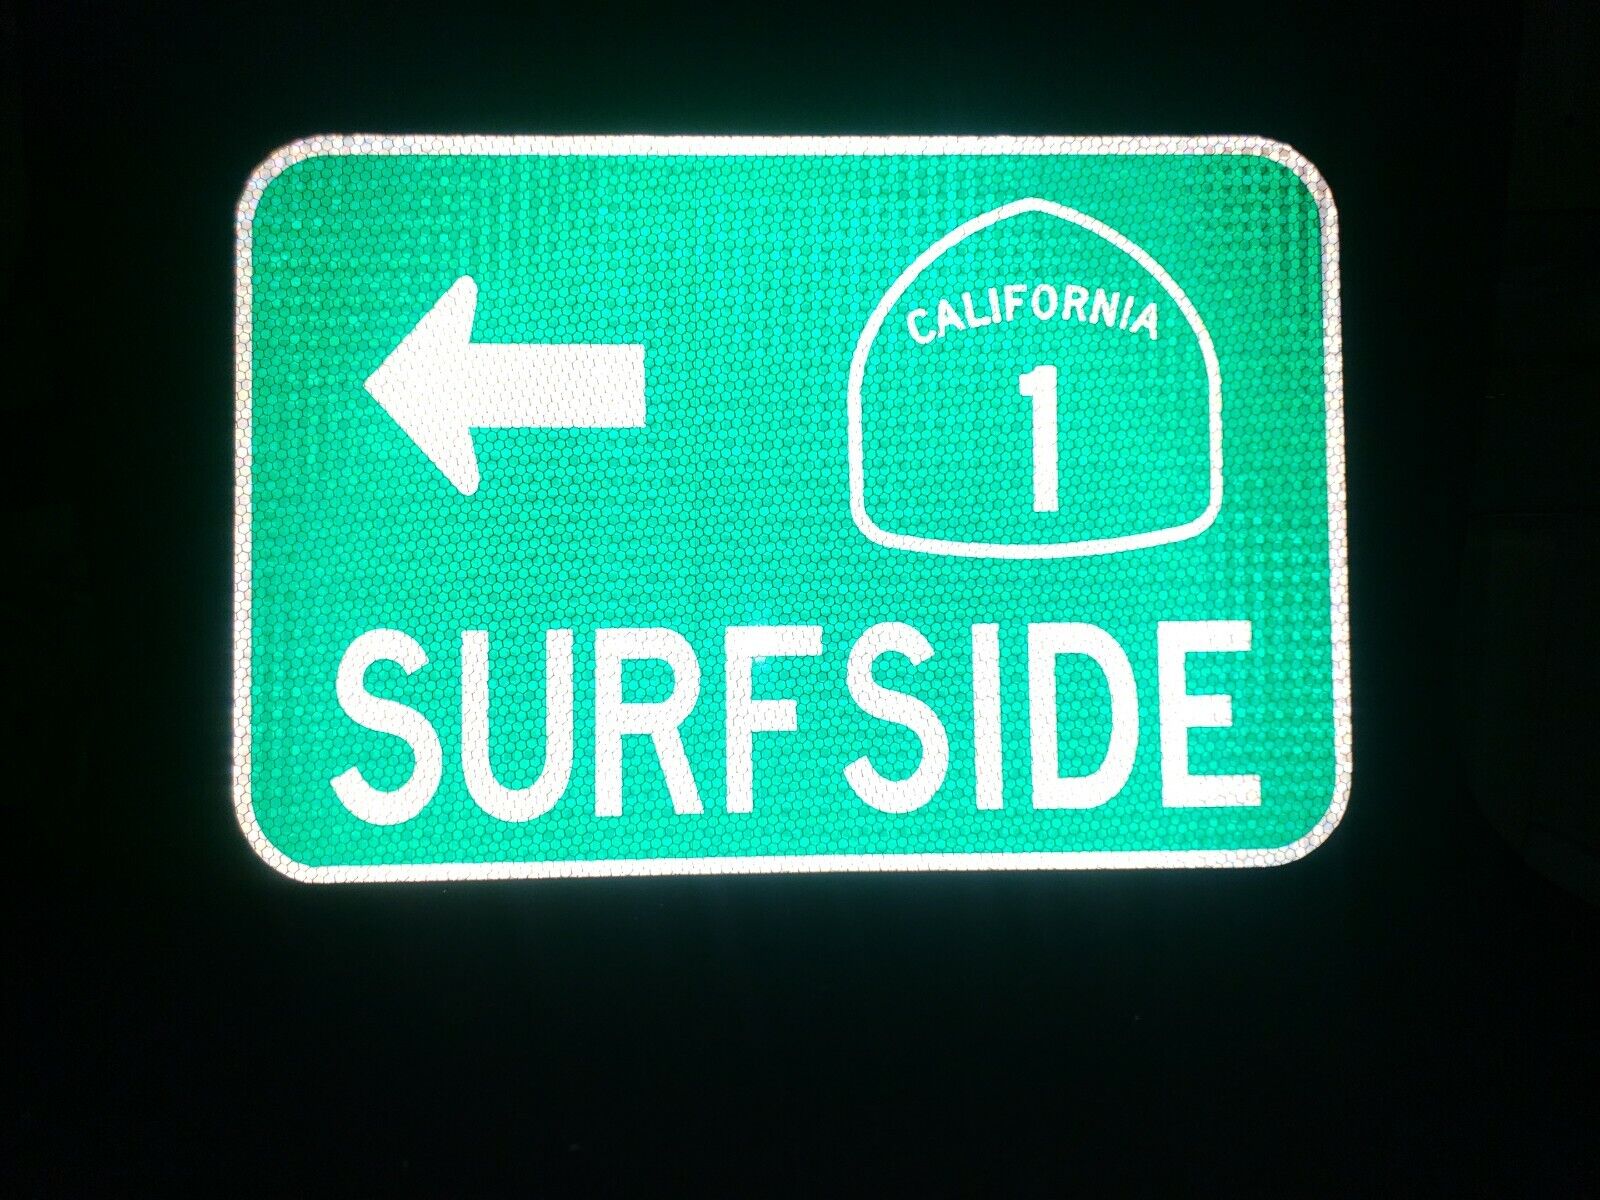 SURFSIDE, California Highway 1 route road sign 12